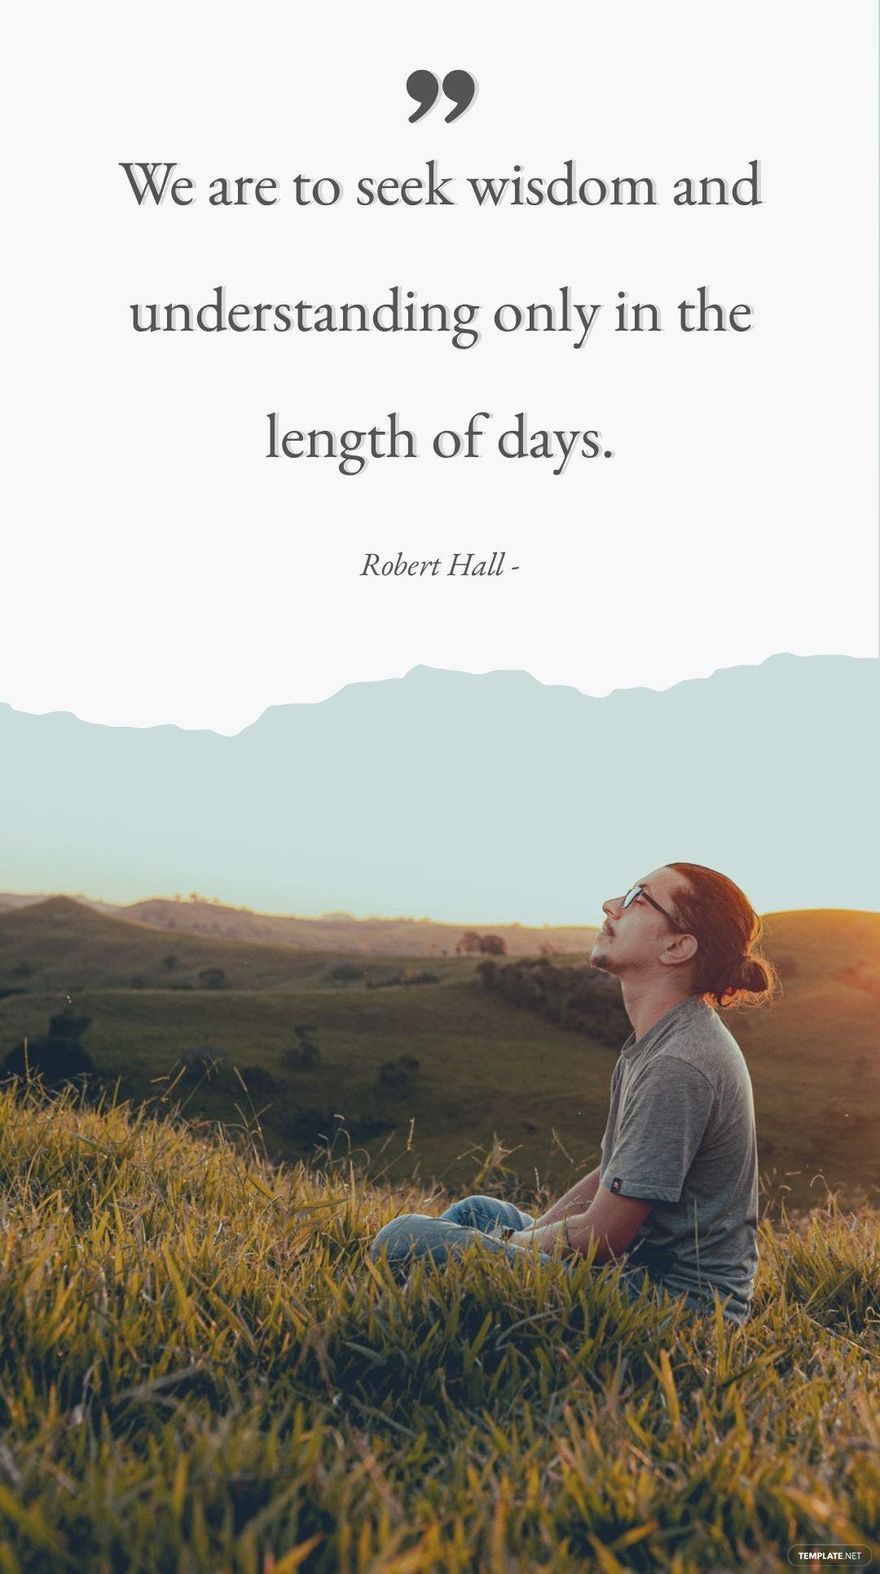 Robert Hall - We are to seek wisdom and understanding only in the length of days.